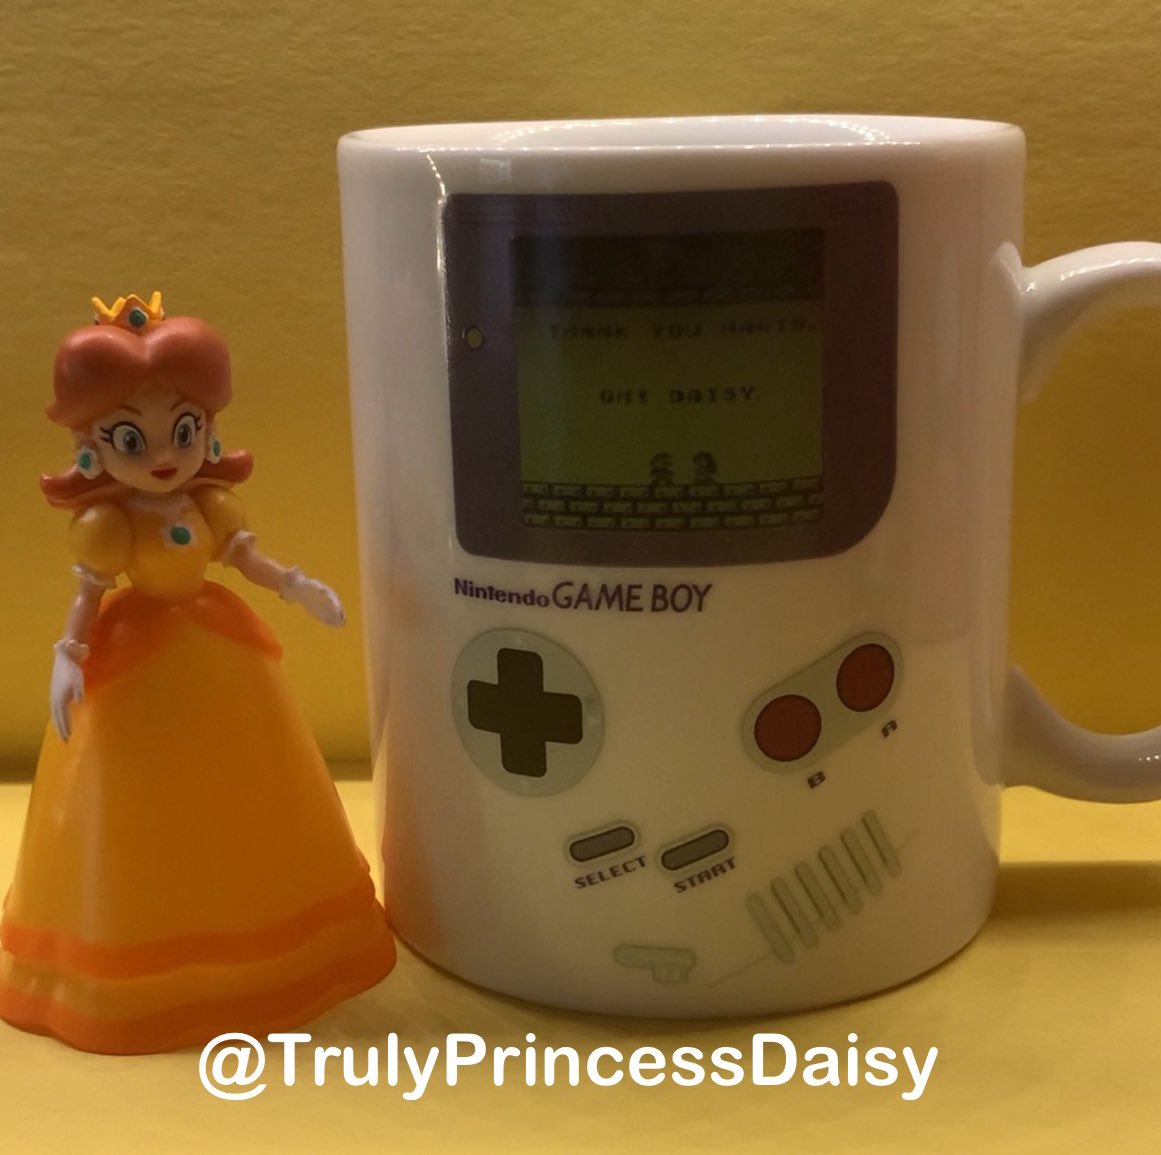 Since Mario Land is on everyone’s mind right now it reminded me of this cool mug I have that shows the title and ending screens of the game when you add something hot to it, it’s a pretty cool thing to have 💛